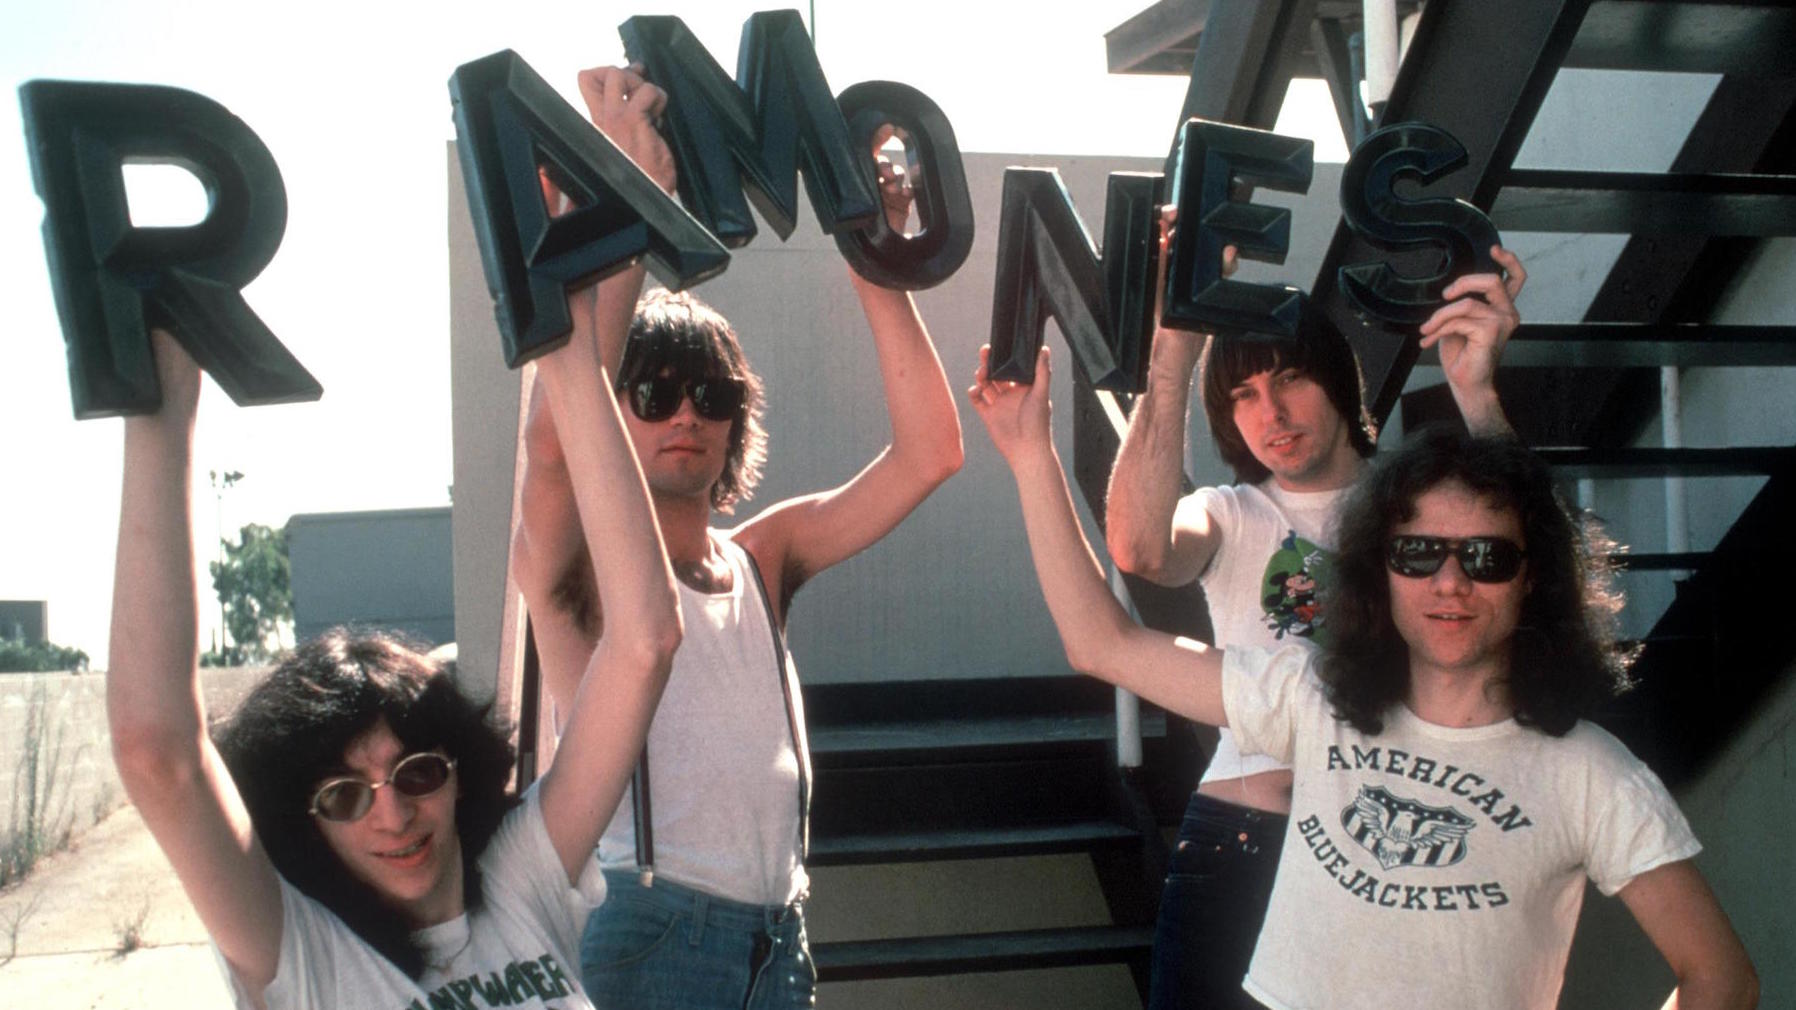 pause cleanse Sincerity The Top 10 Best Ramones Songs | Louder